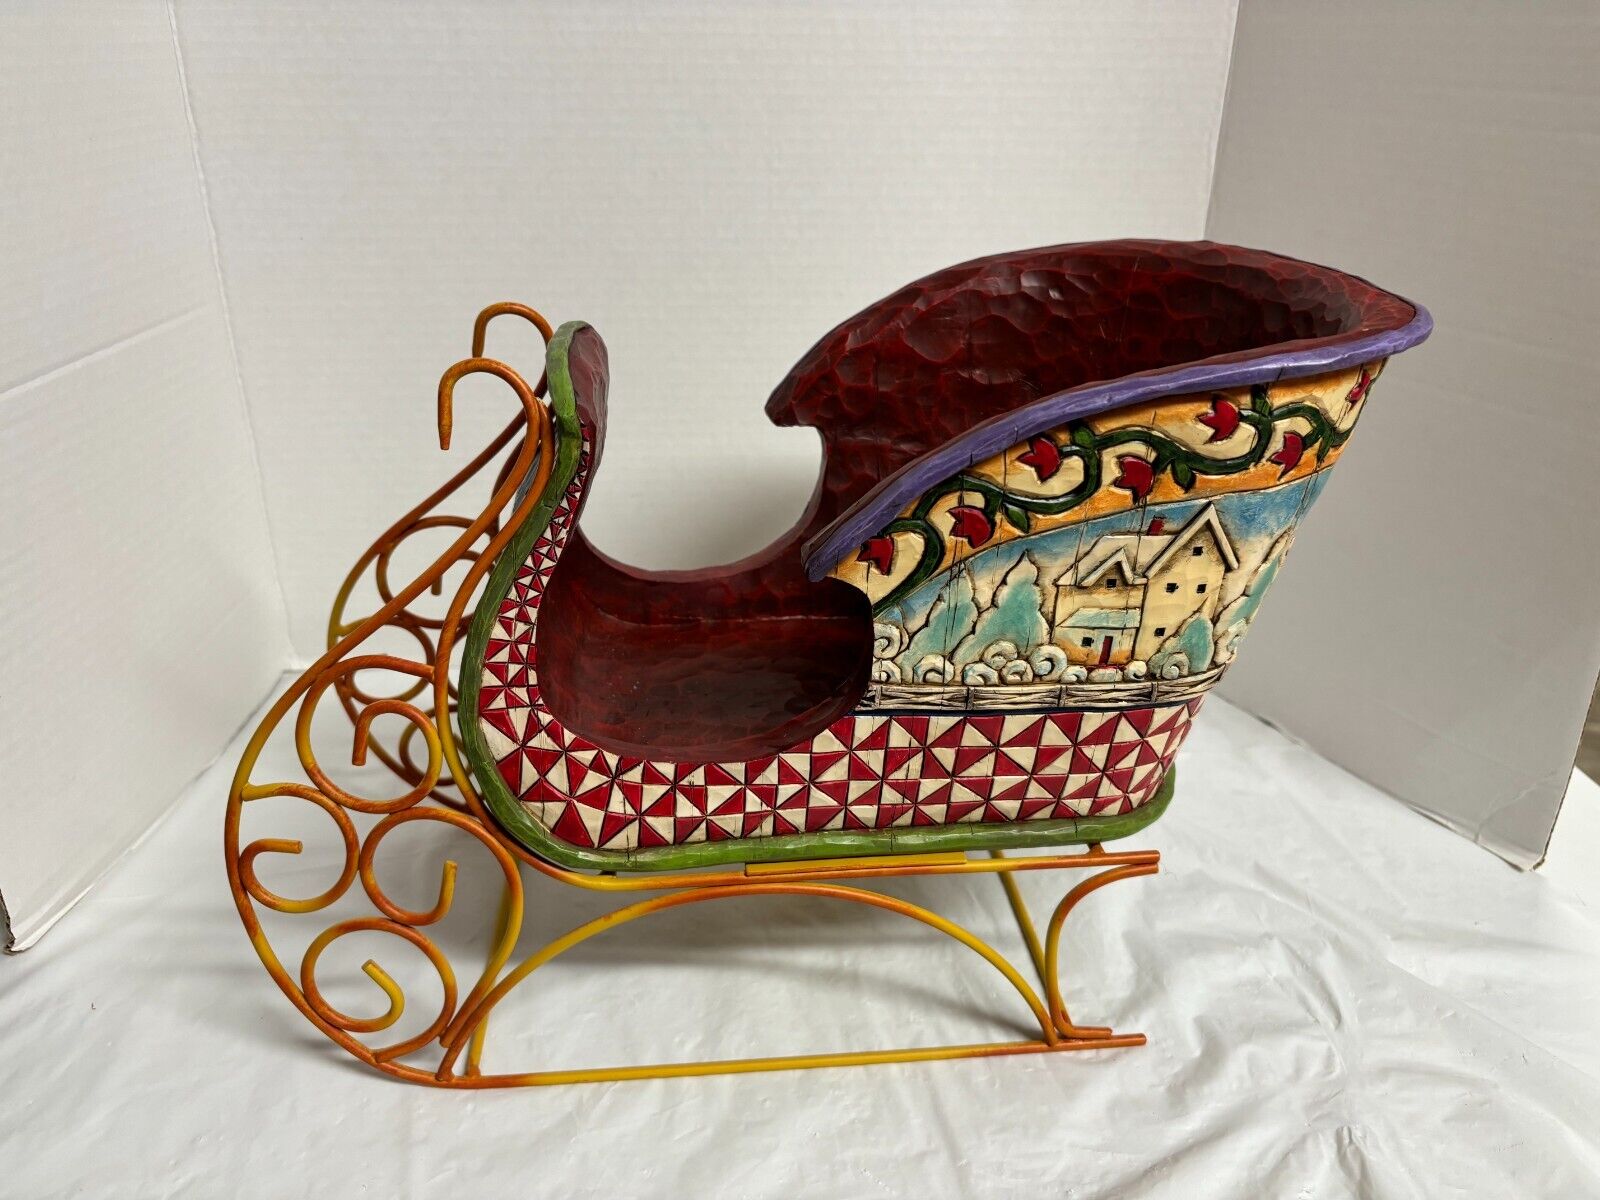 2005 Heartwood Creek Jim Shore A Sleigh Full of Dreams Quilted Enesco Christmas